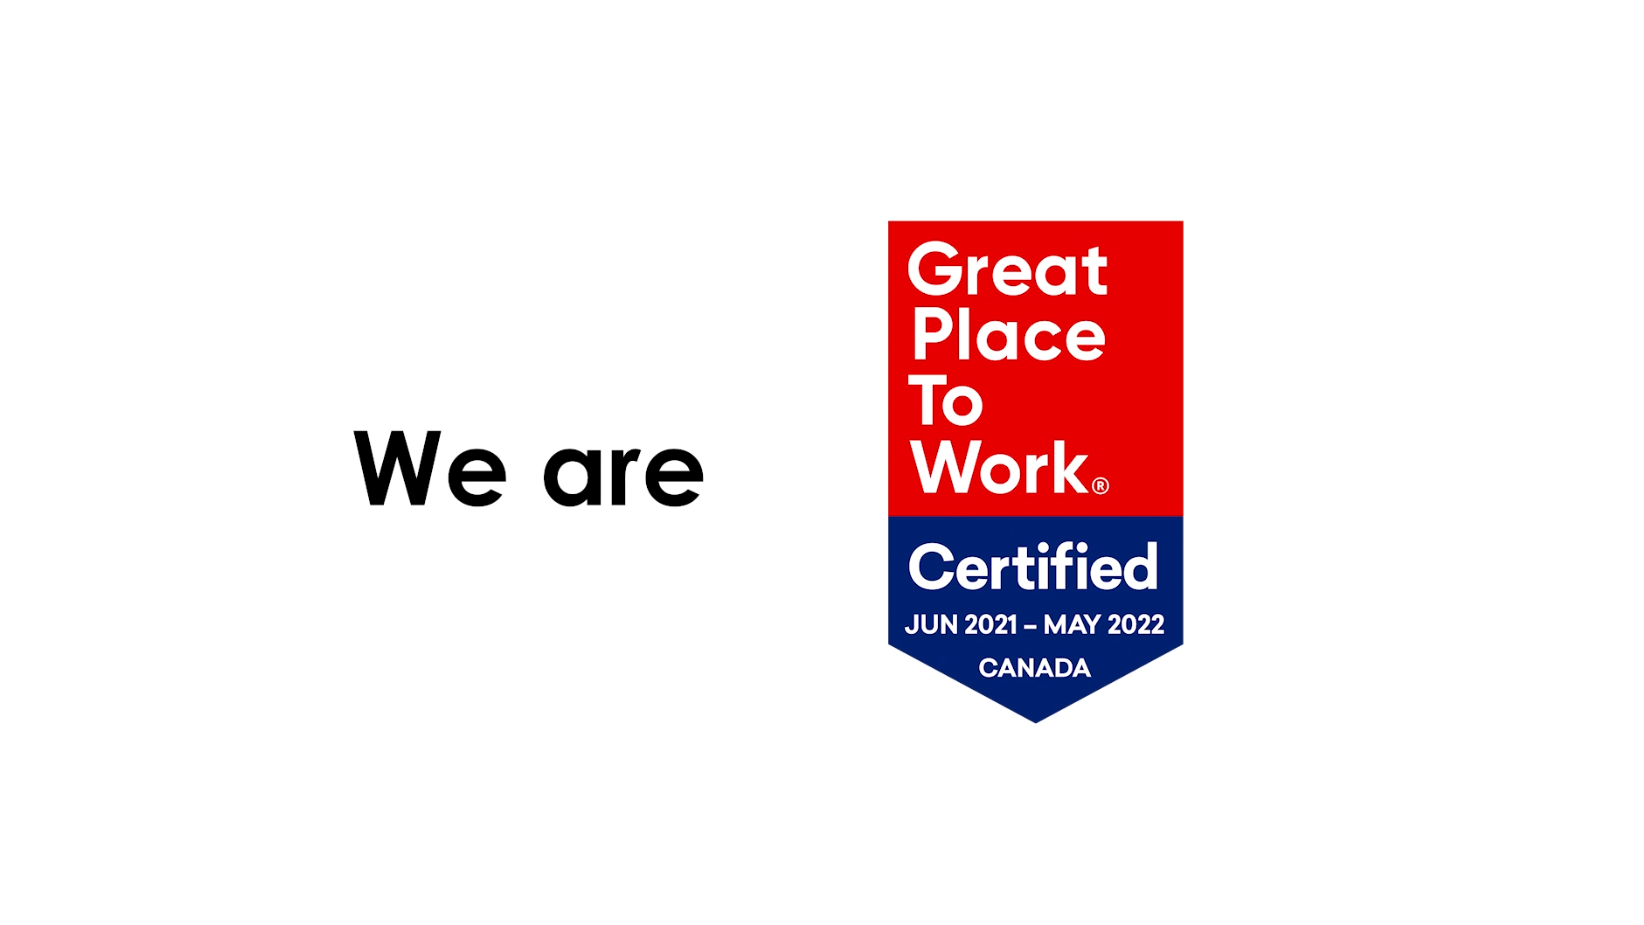 June 2021 to May 2022 Canada Great Place to Work Certification.